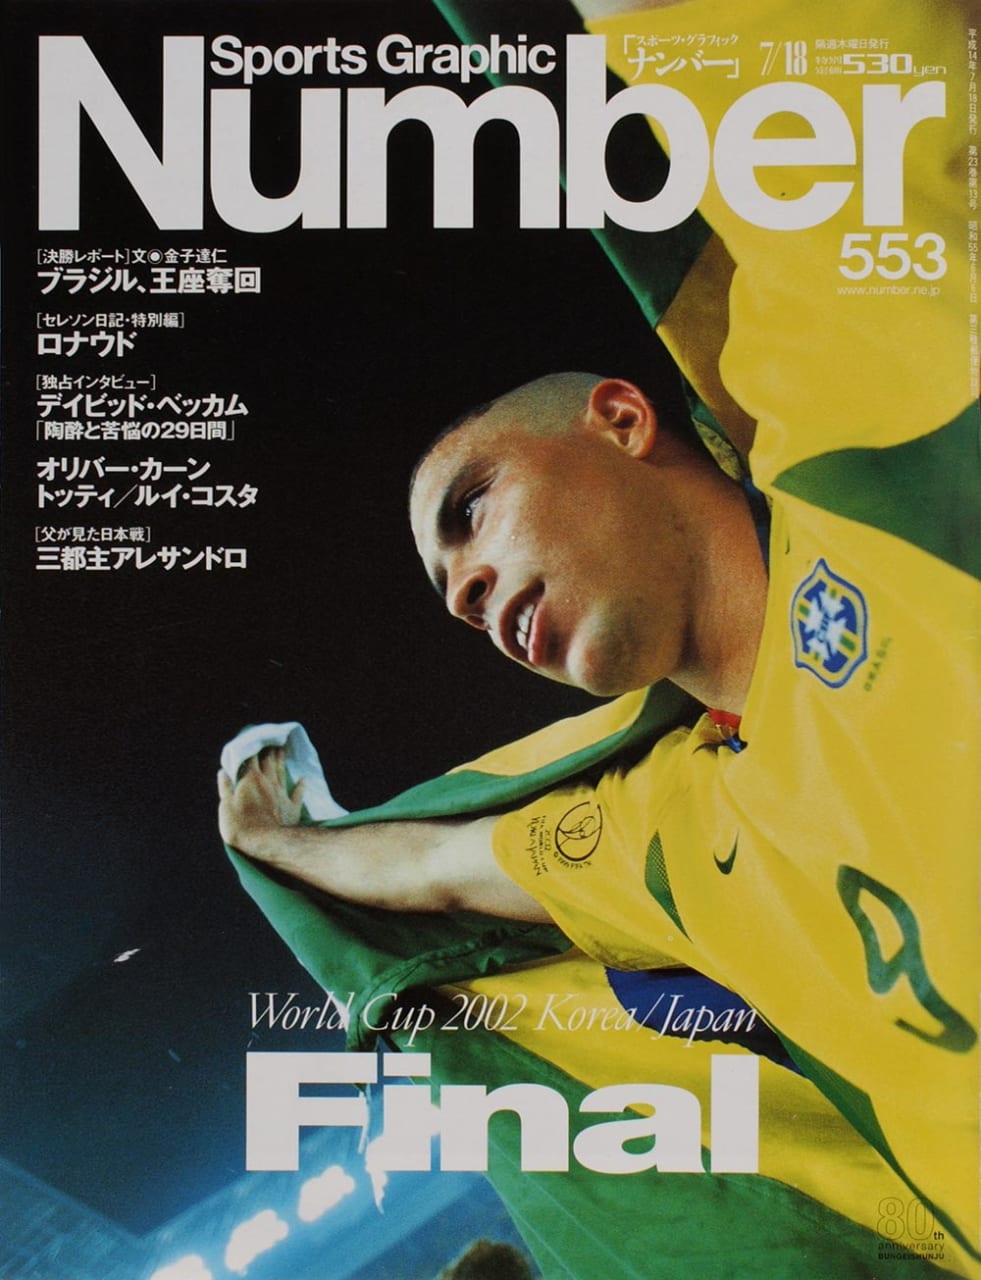 Sports Graphic Number 553号
2002年7月4日発売
表紙撮影：赤木真二